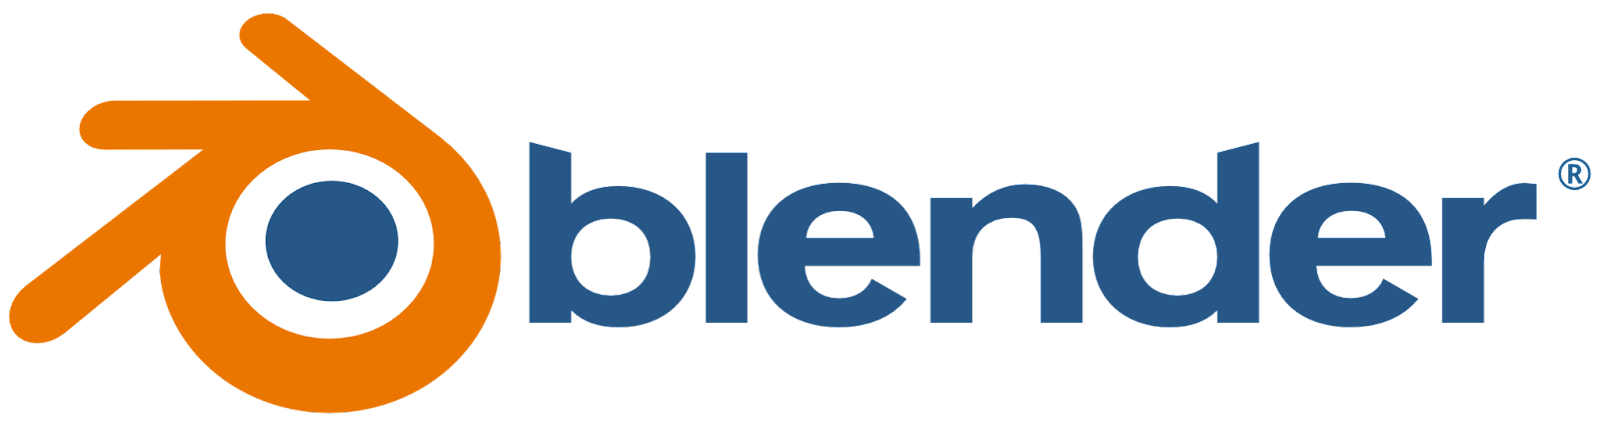 Blender logo in blue and yellow